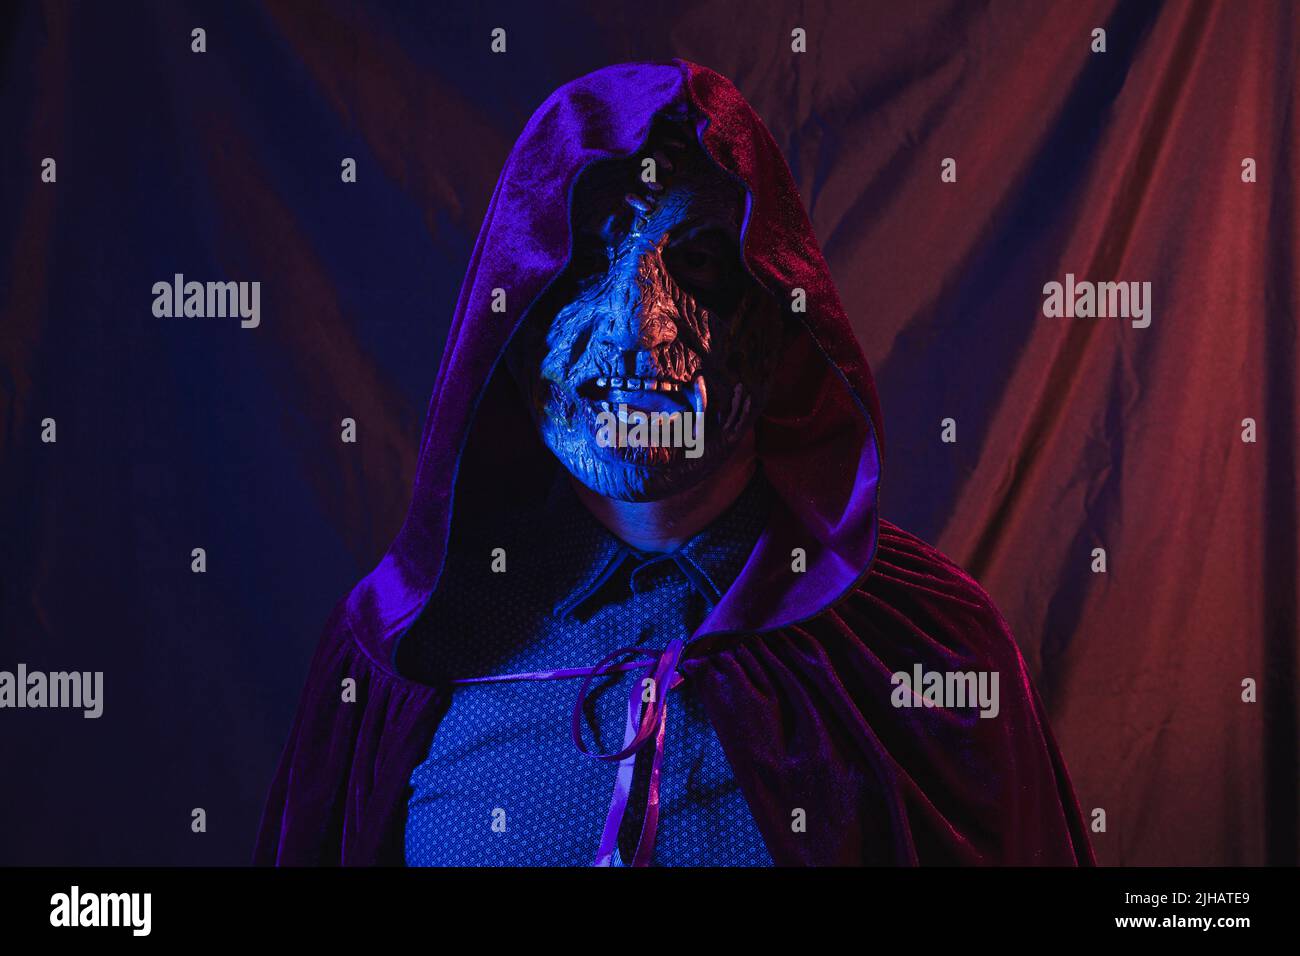 Portrait of a zombie dressed in a shirt and hooded cape facing the camera. The scene is dark, illuminated by blue and orange lights. Stock Photo